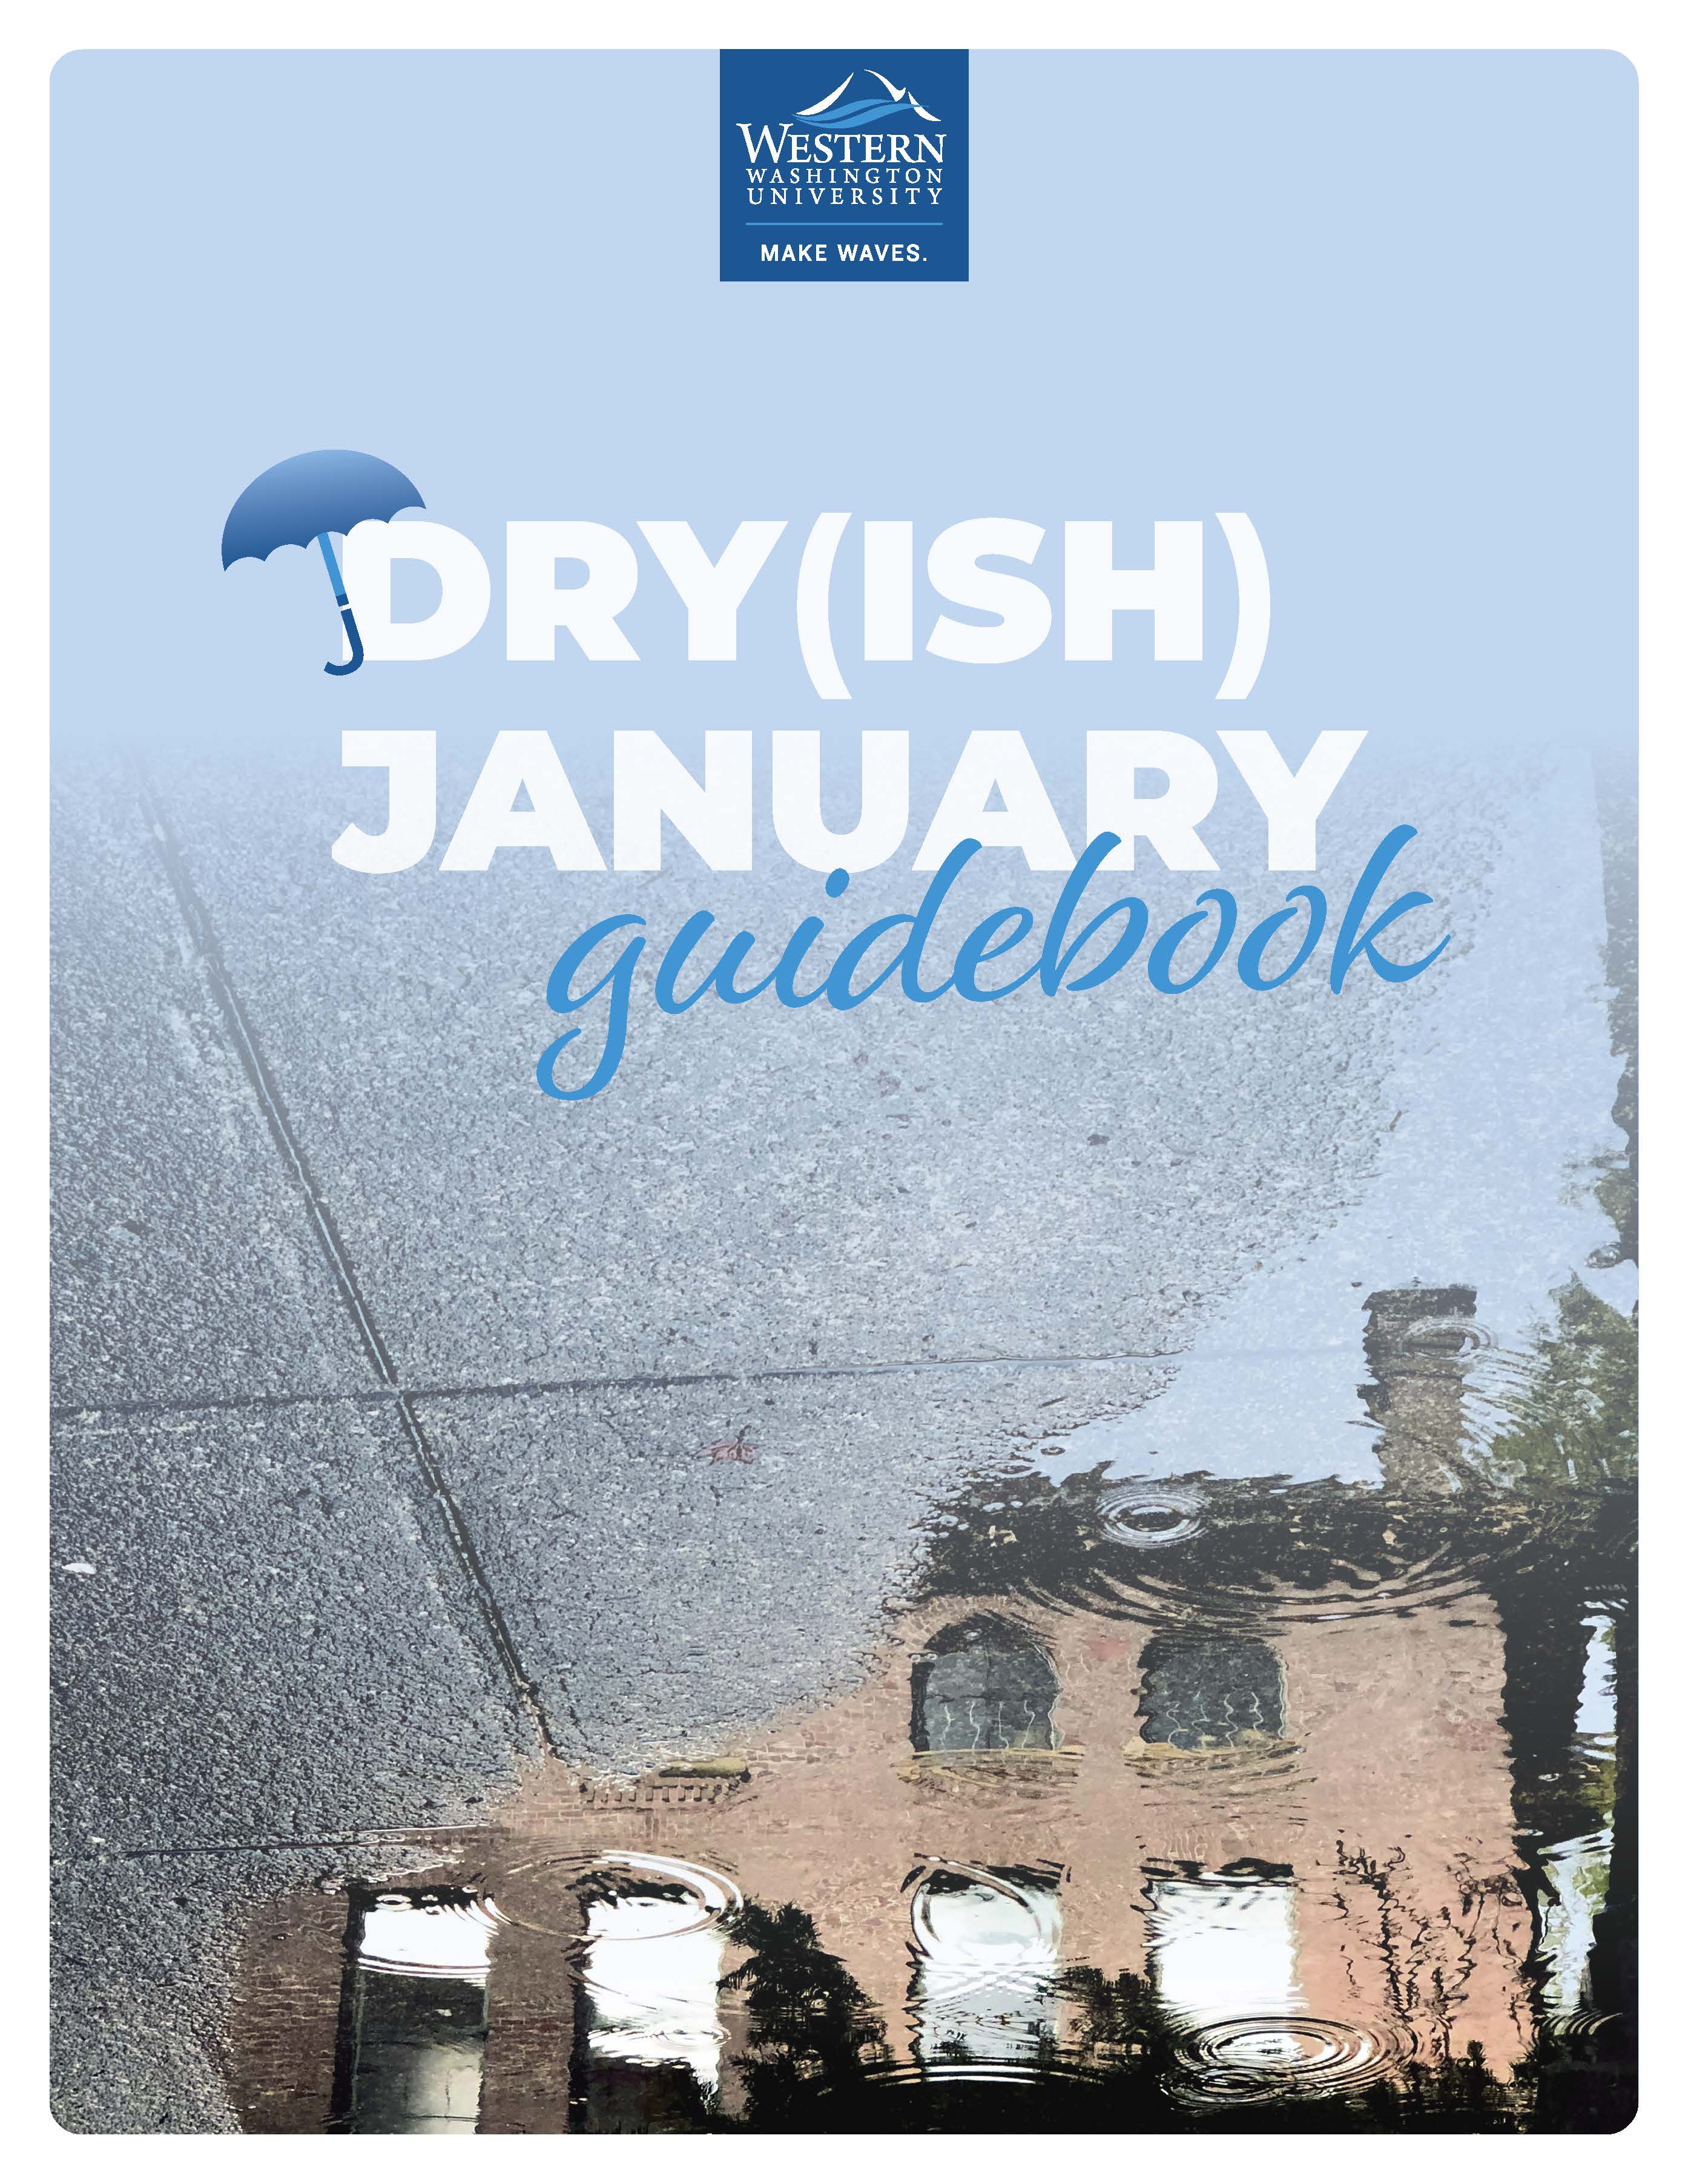 A blue umbrella beside the words Dryish January Guidebook on a background of a wet sidewalk with a reflection of Old Main